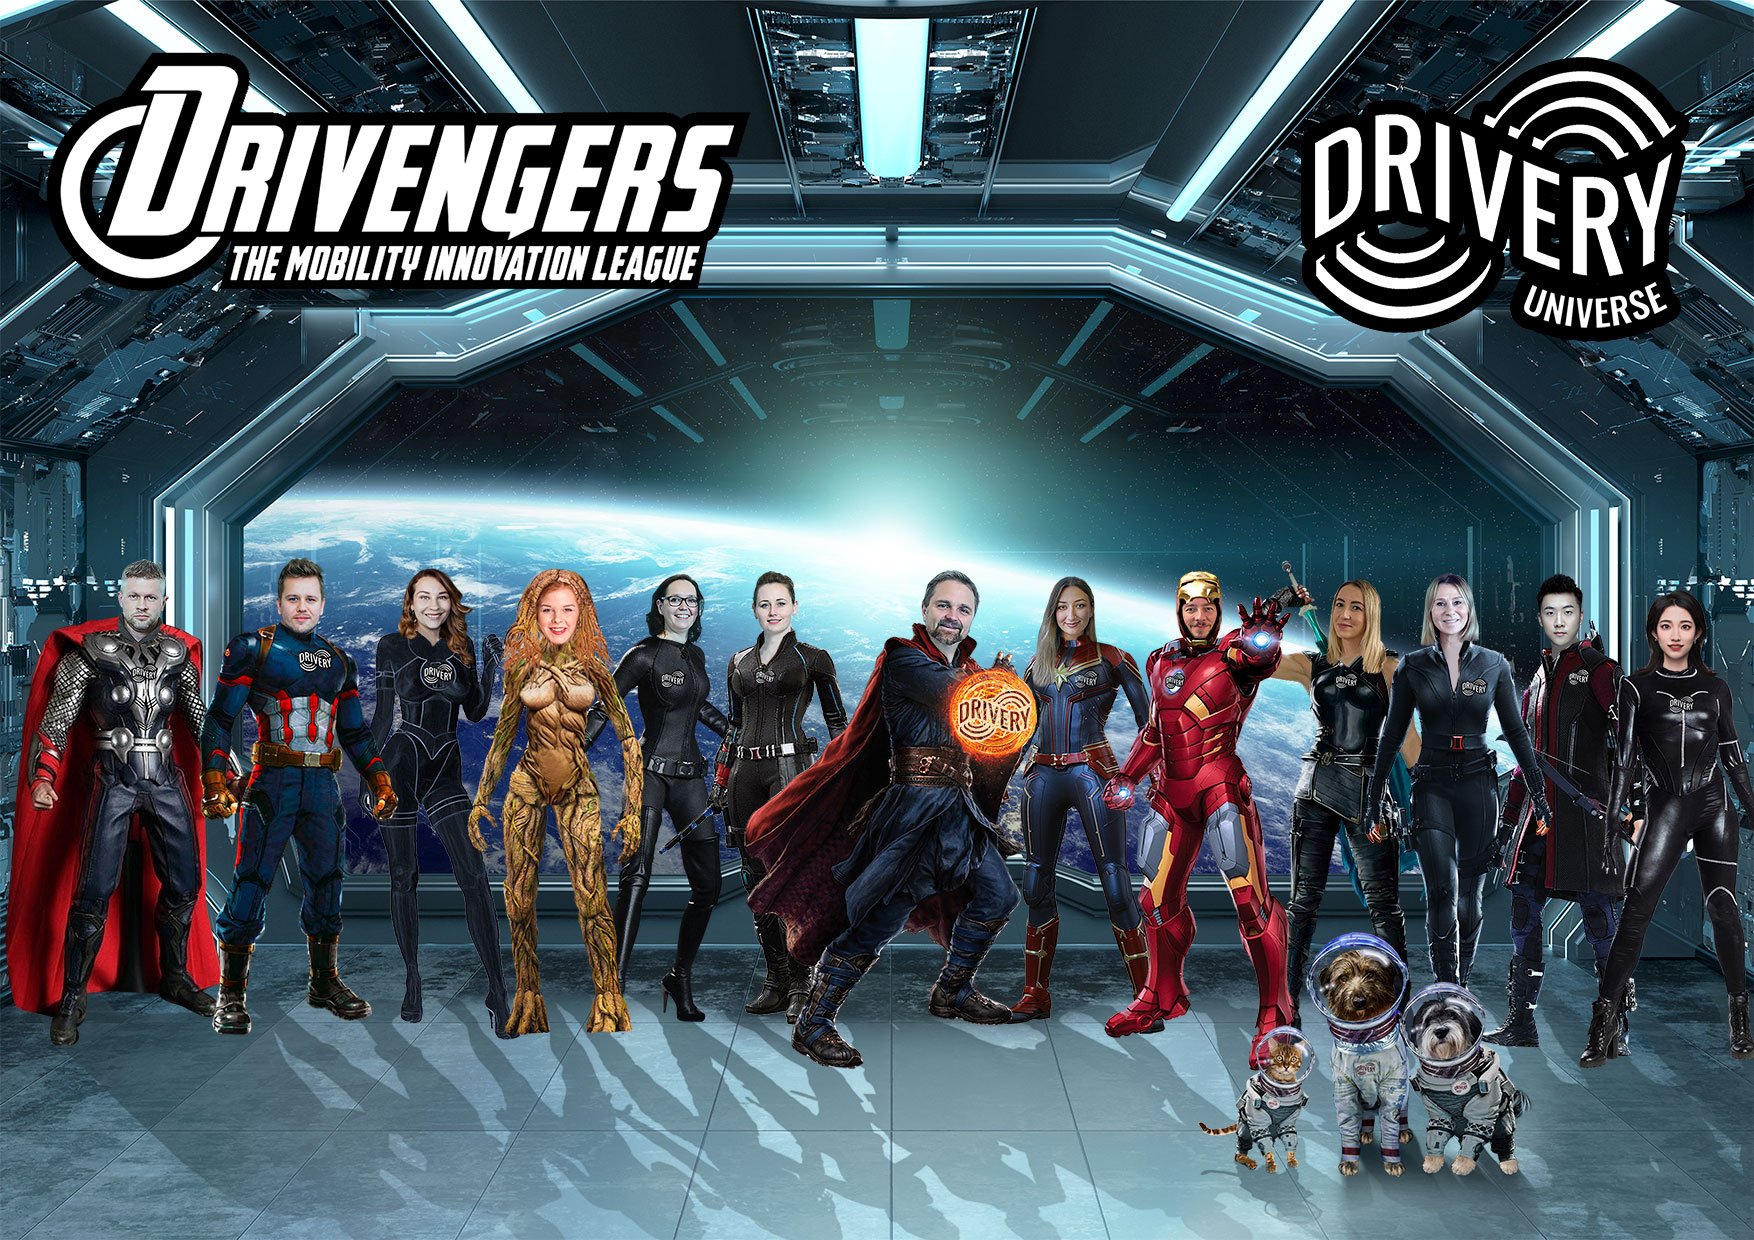 TheDrivery-Drivengers